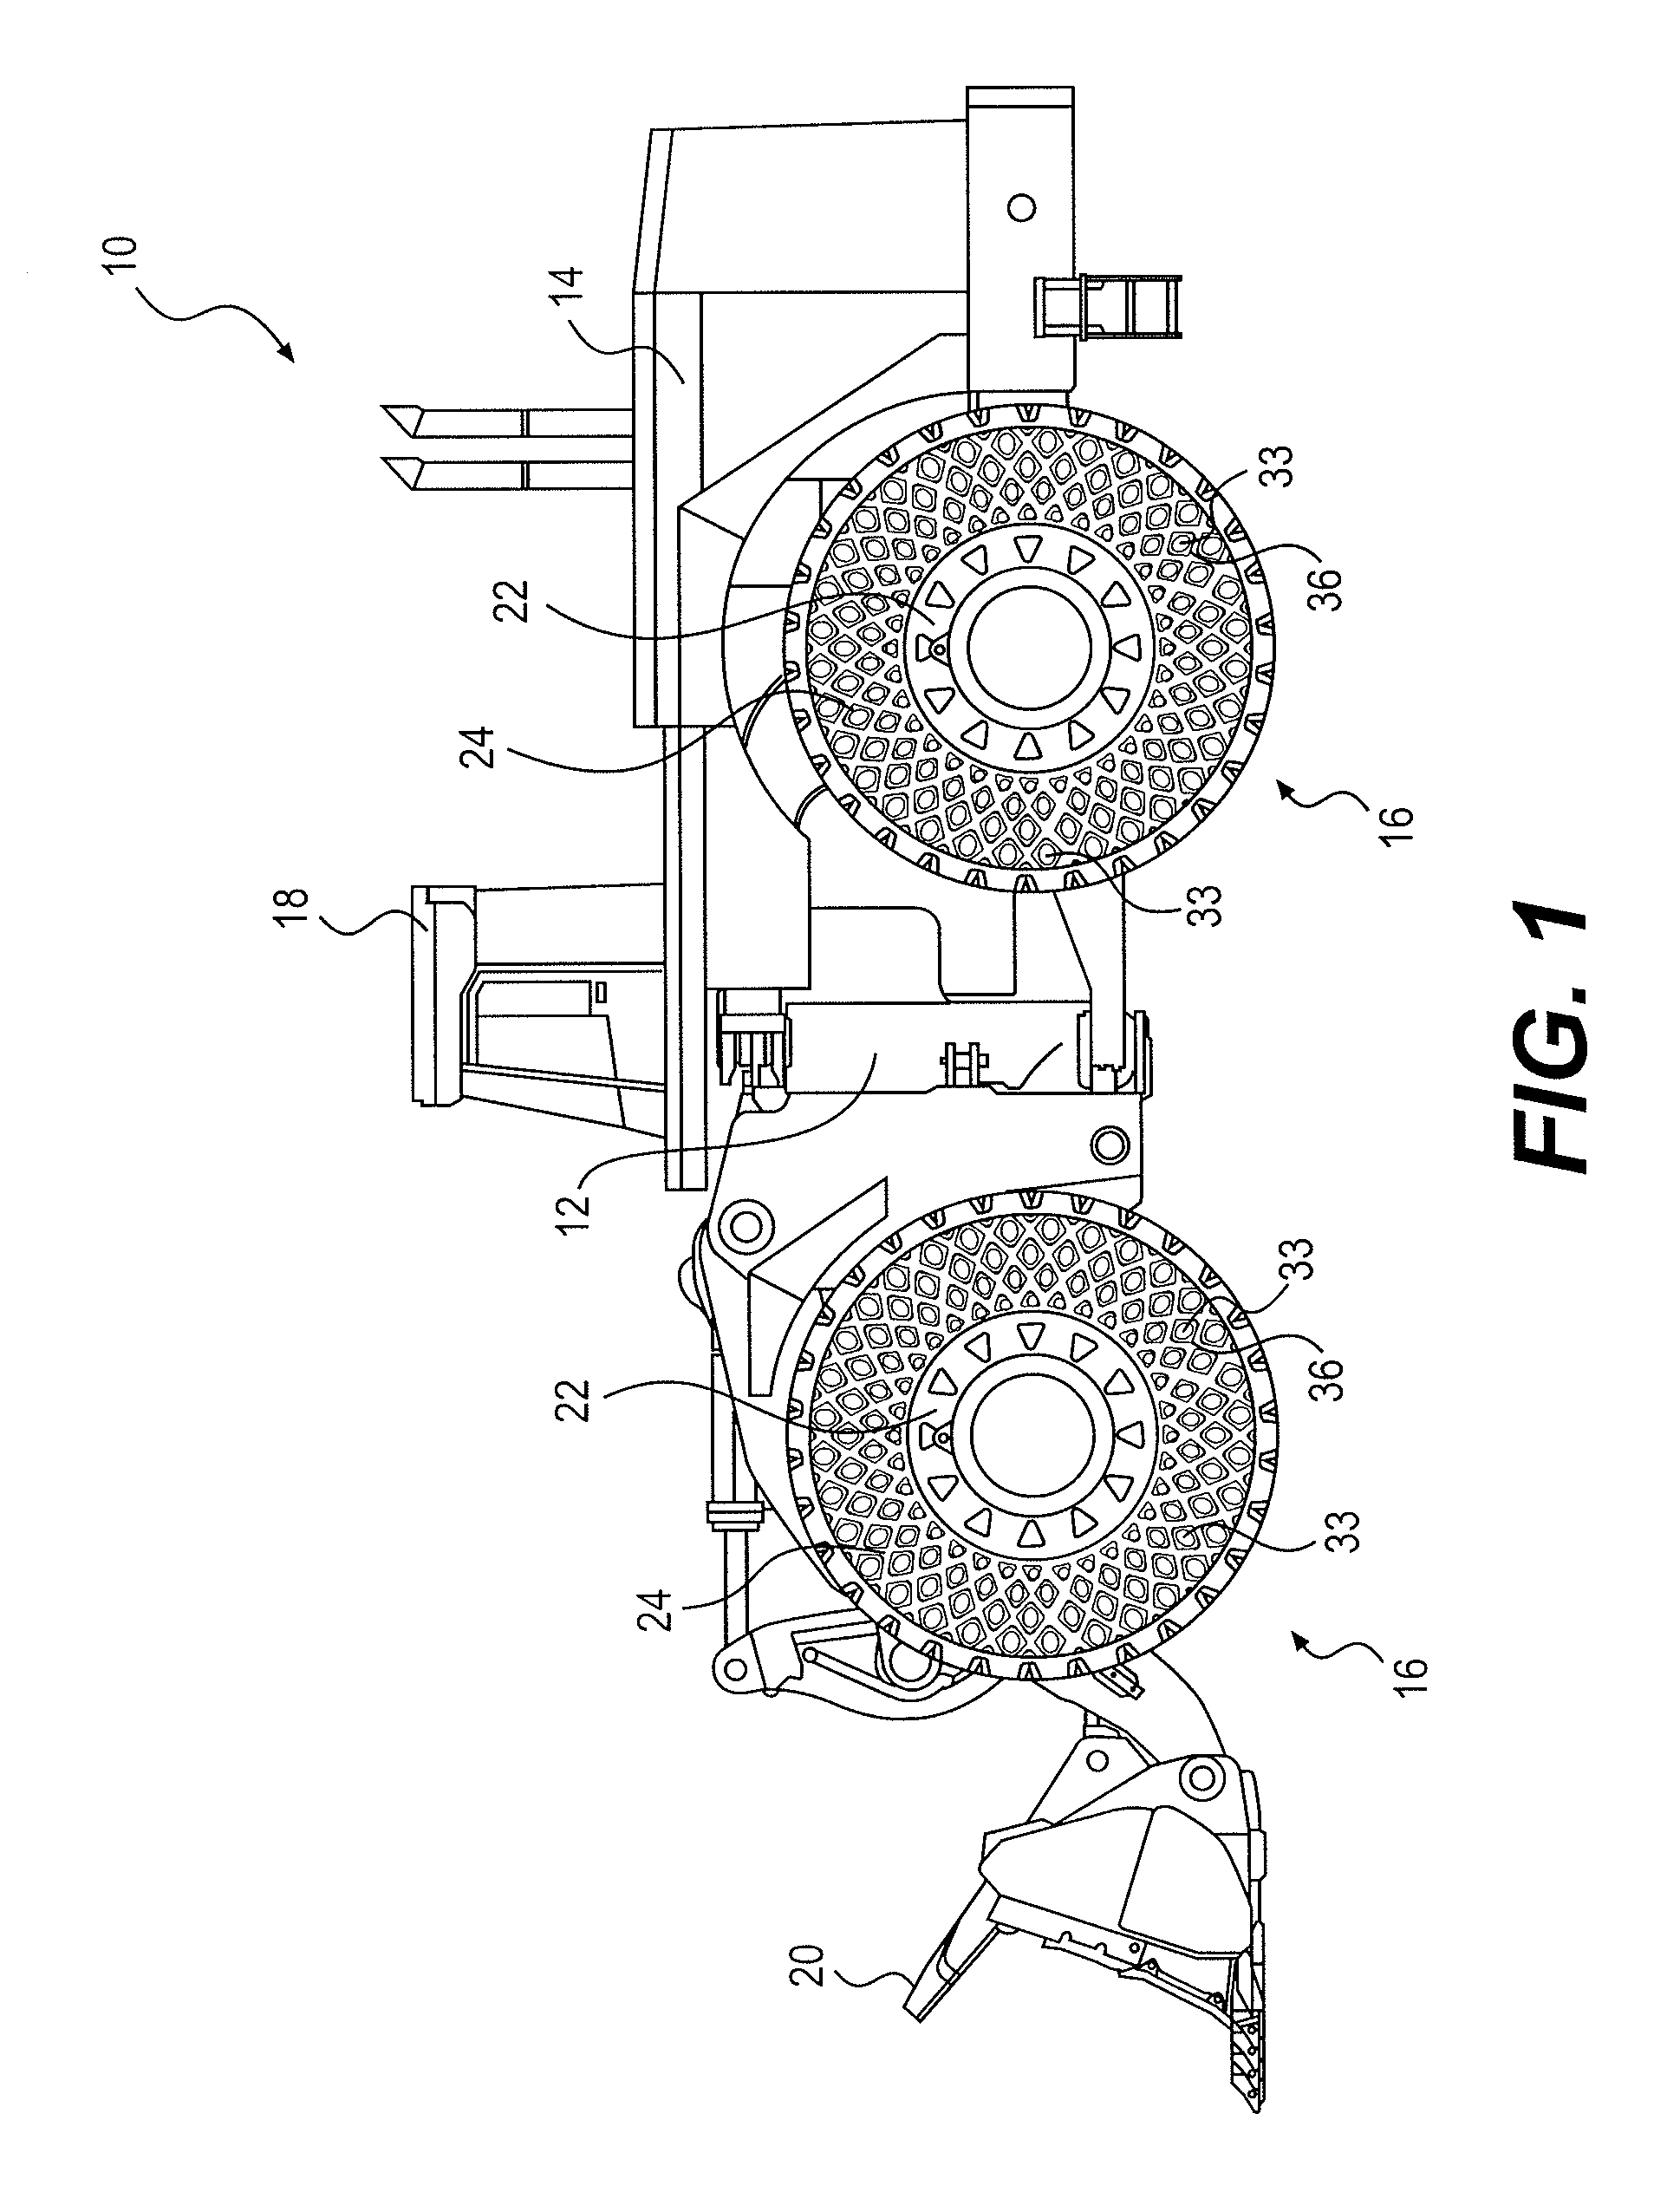 Reinforced non-pneumatic tire and system for molding reinforced non-pneumatic tire